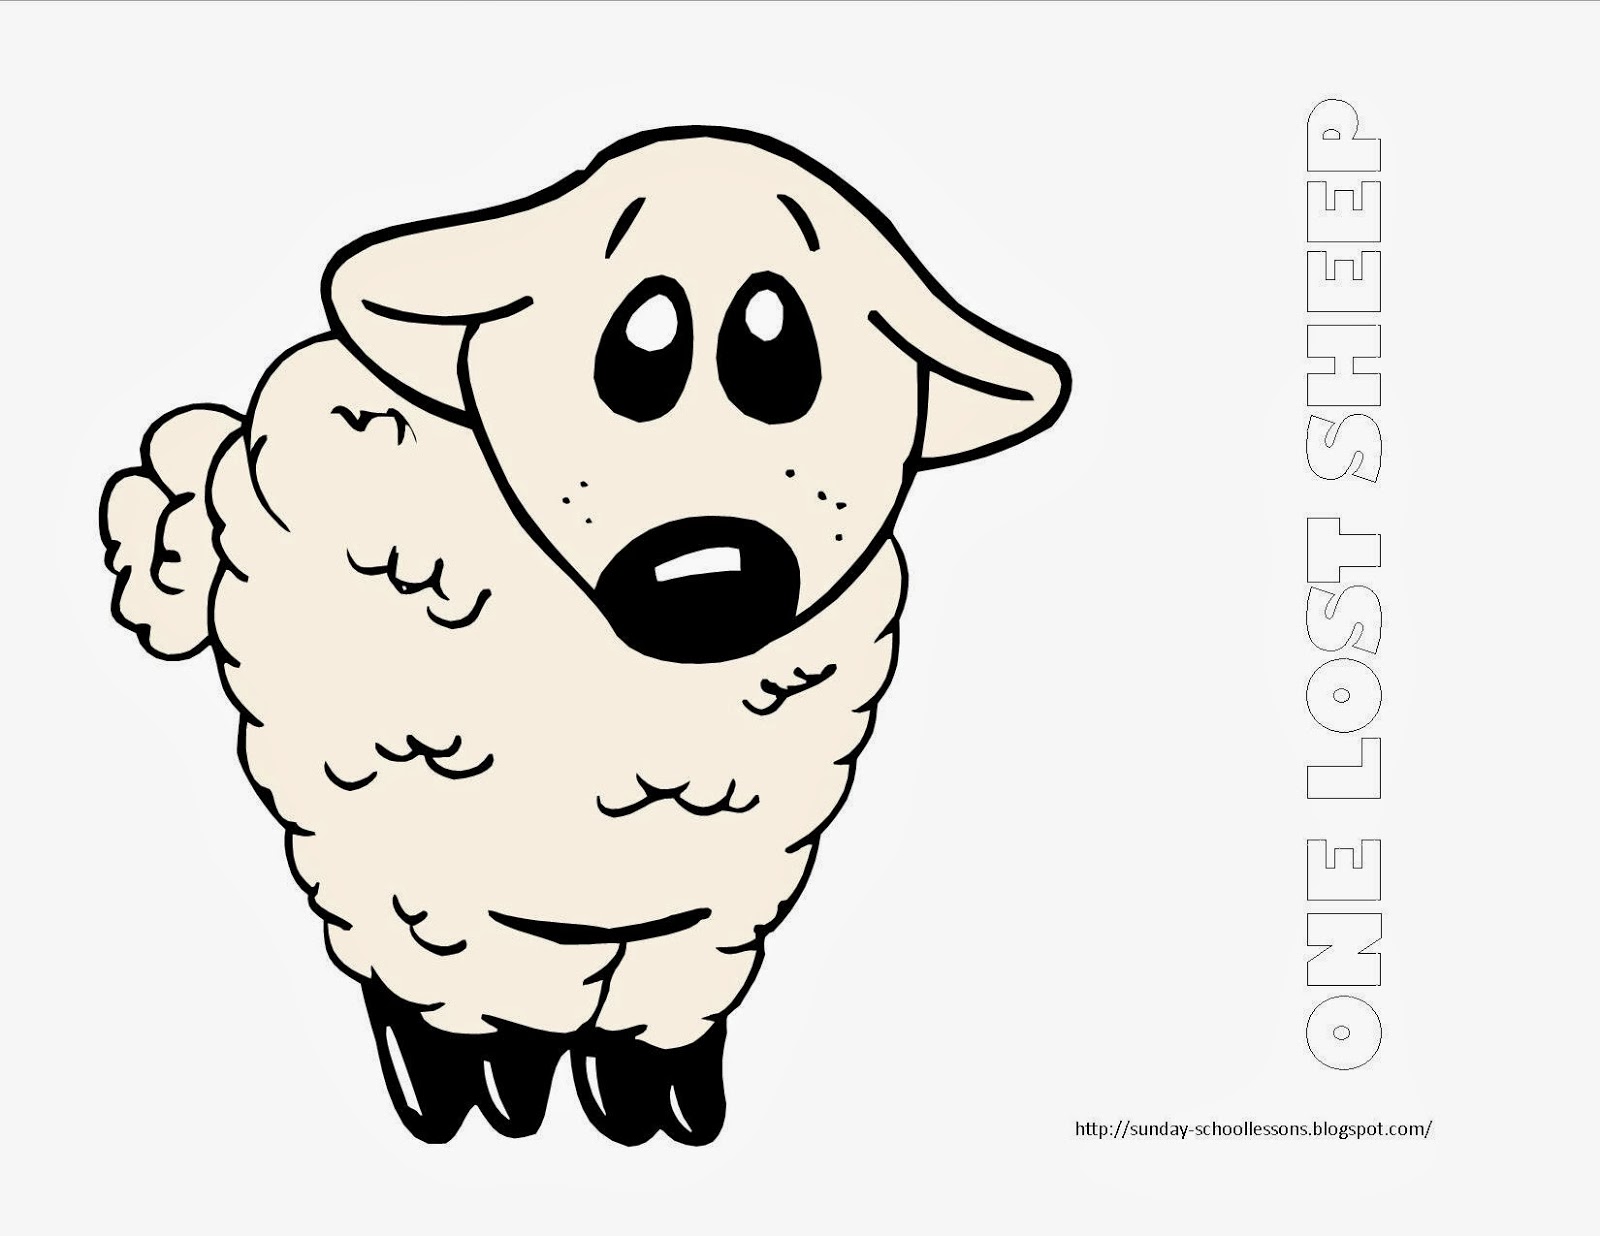 One lost sheep coloring page